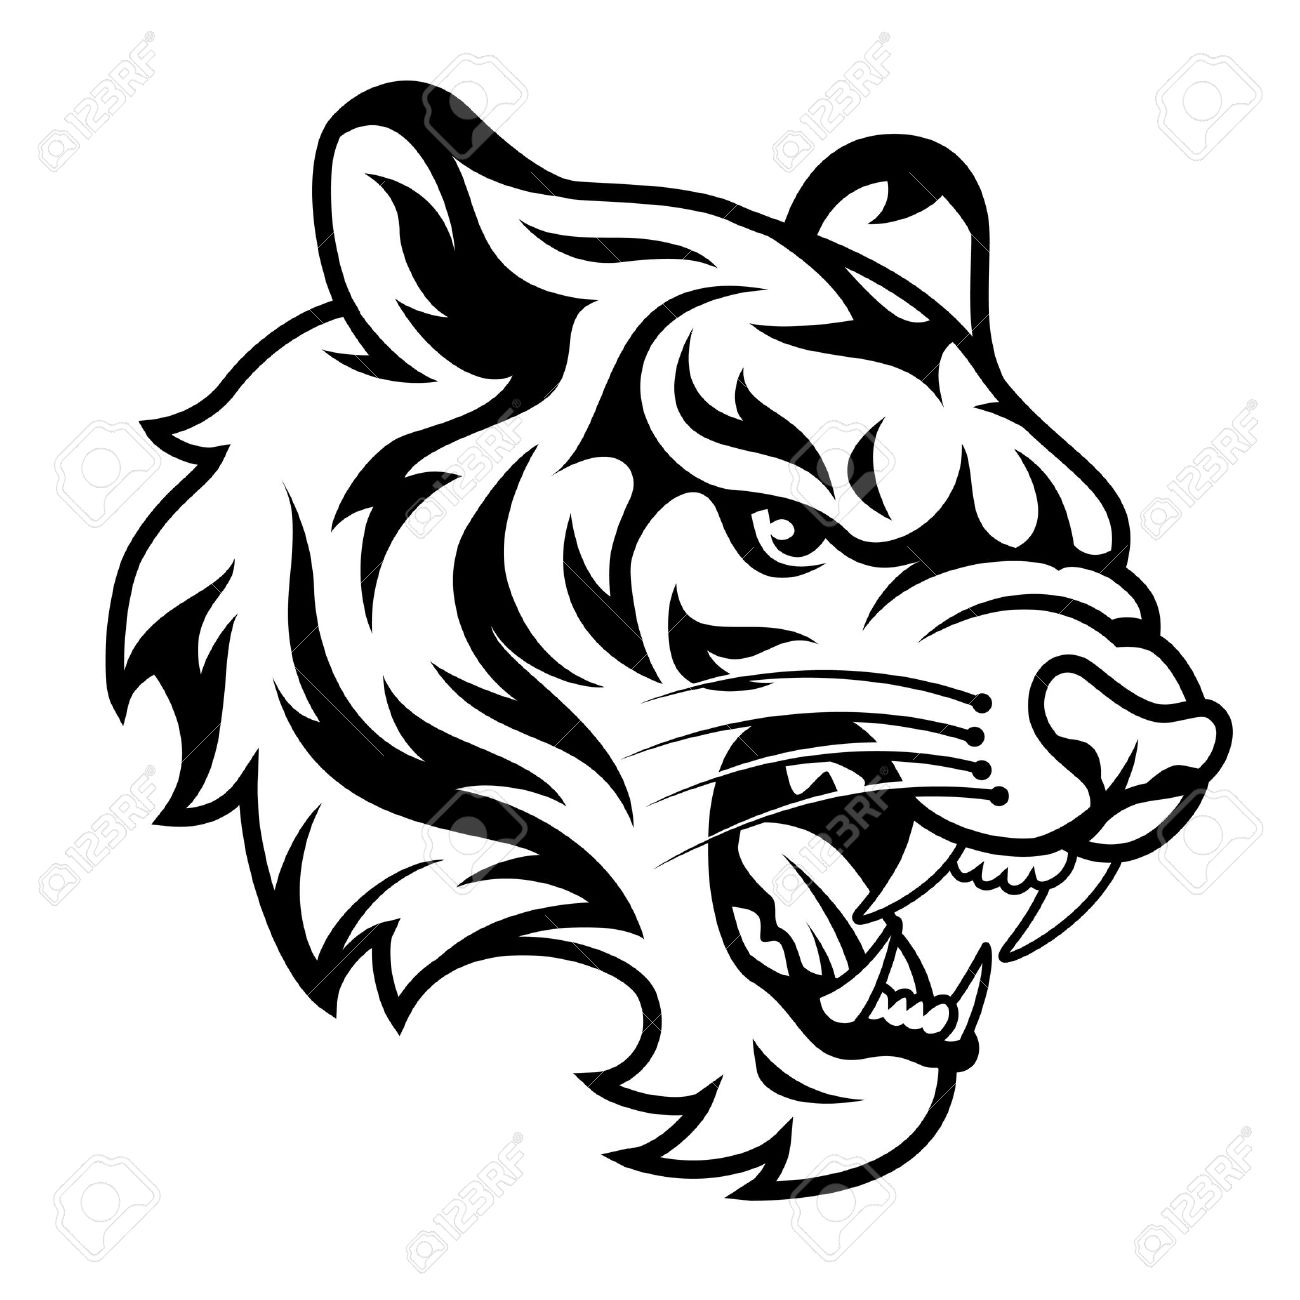 Tiger Clipart Black And White.